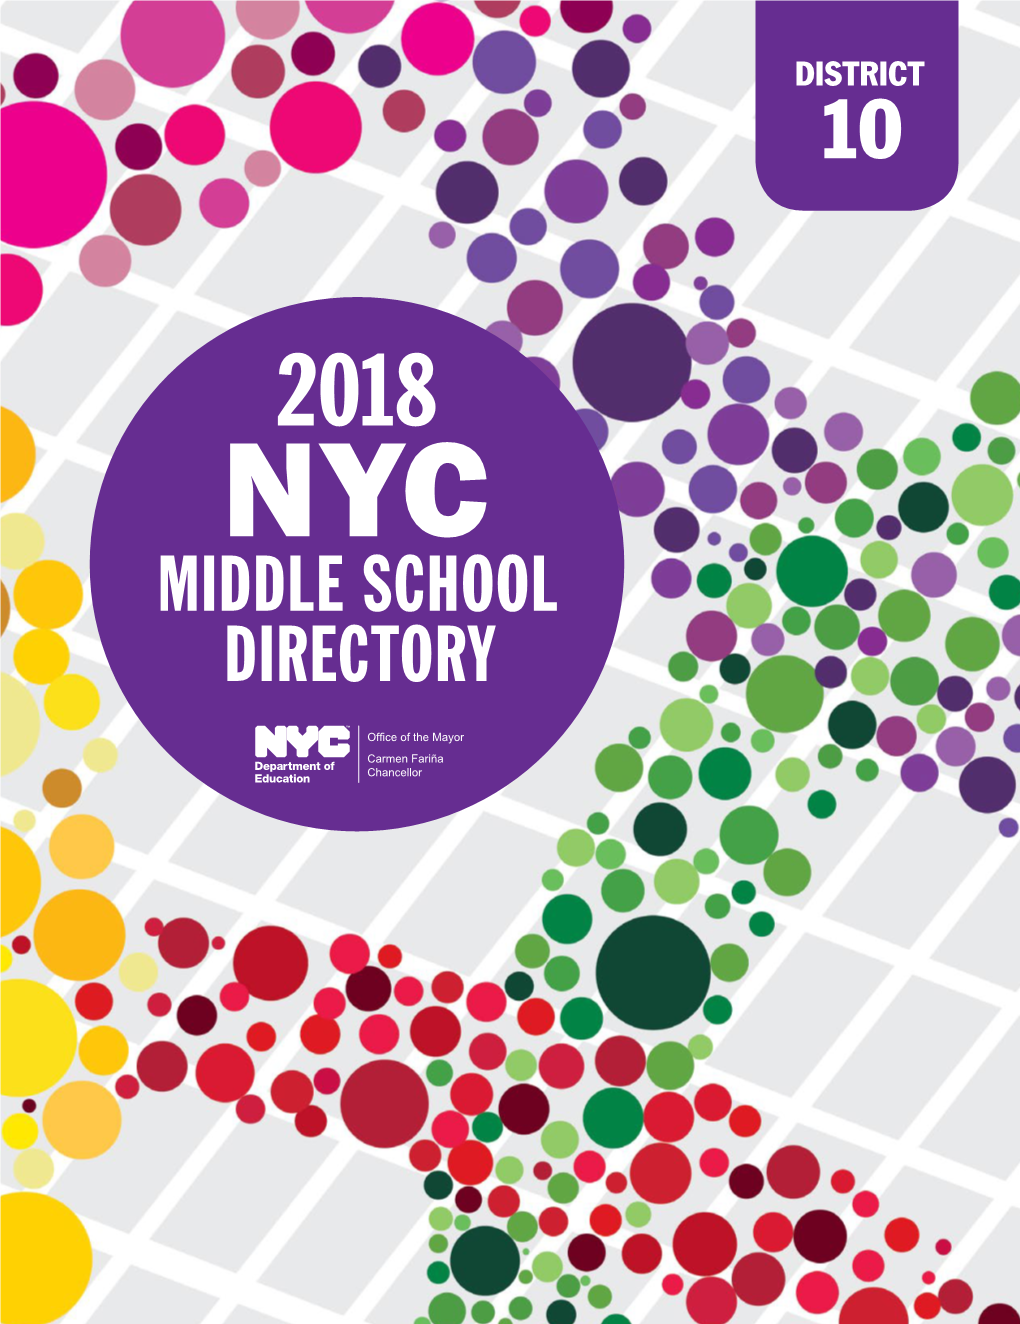 Middle School Directory